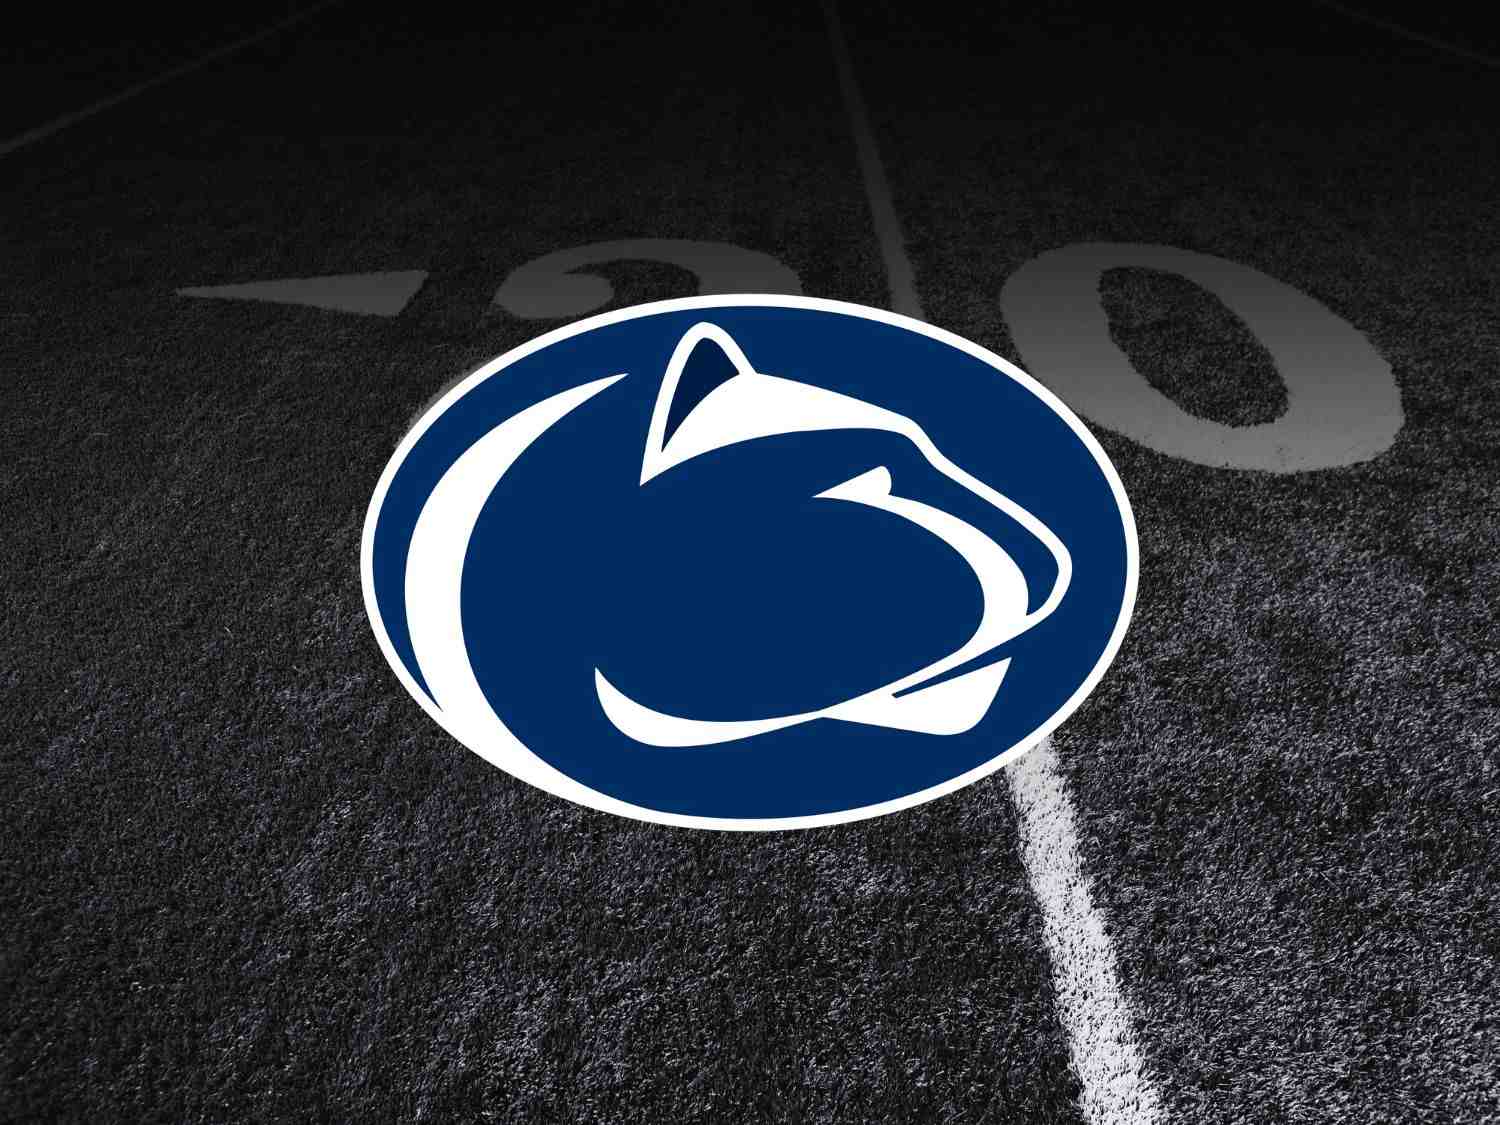 Penn State Nittany Lions Tickets and Seats